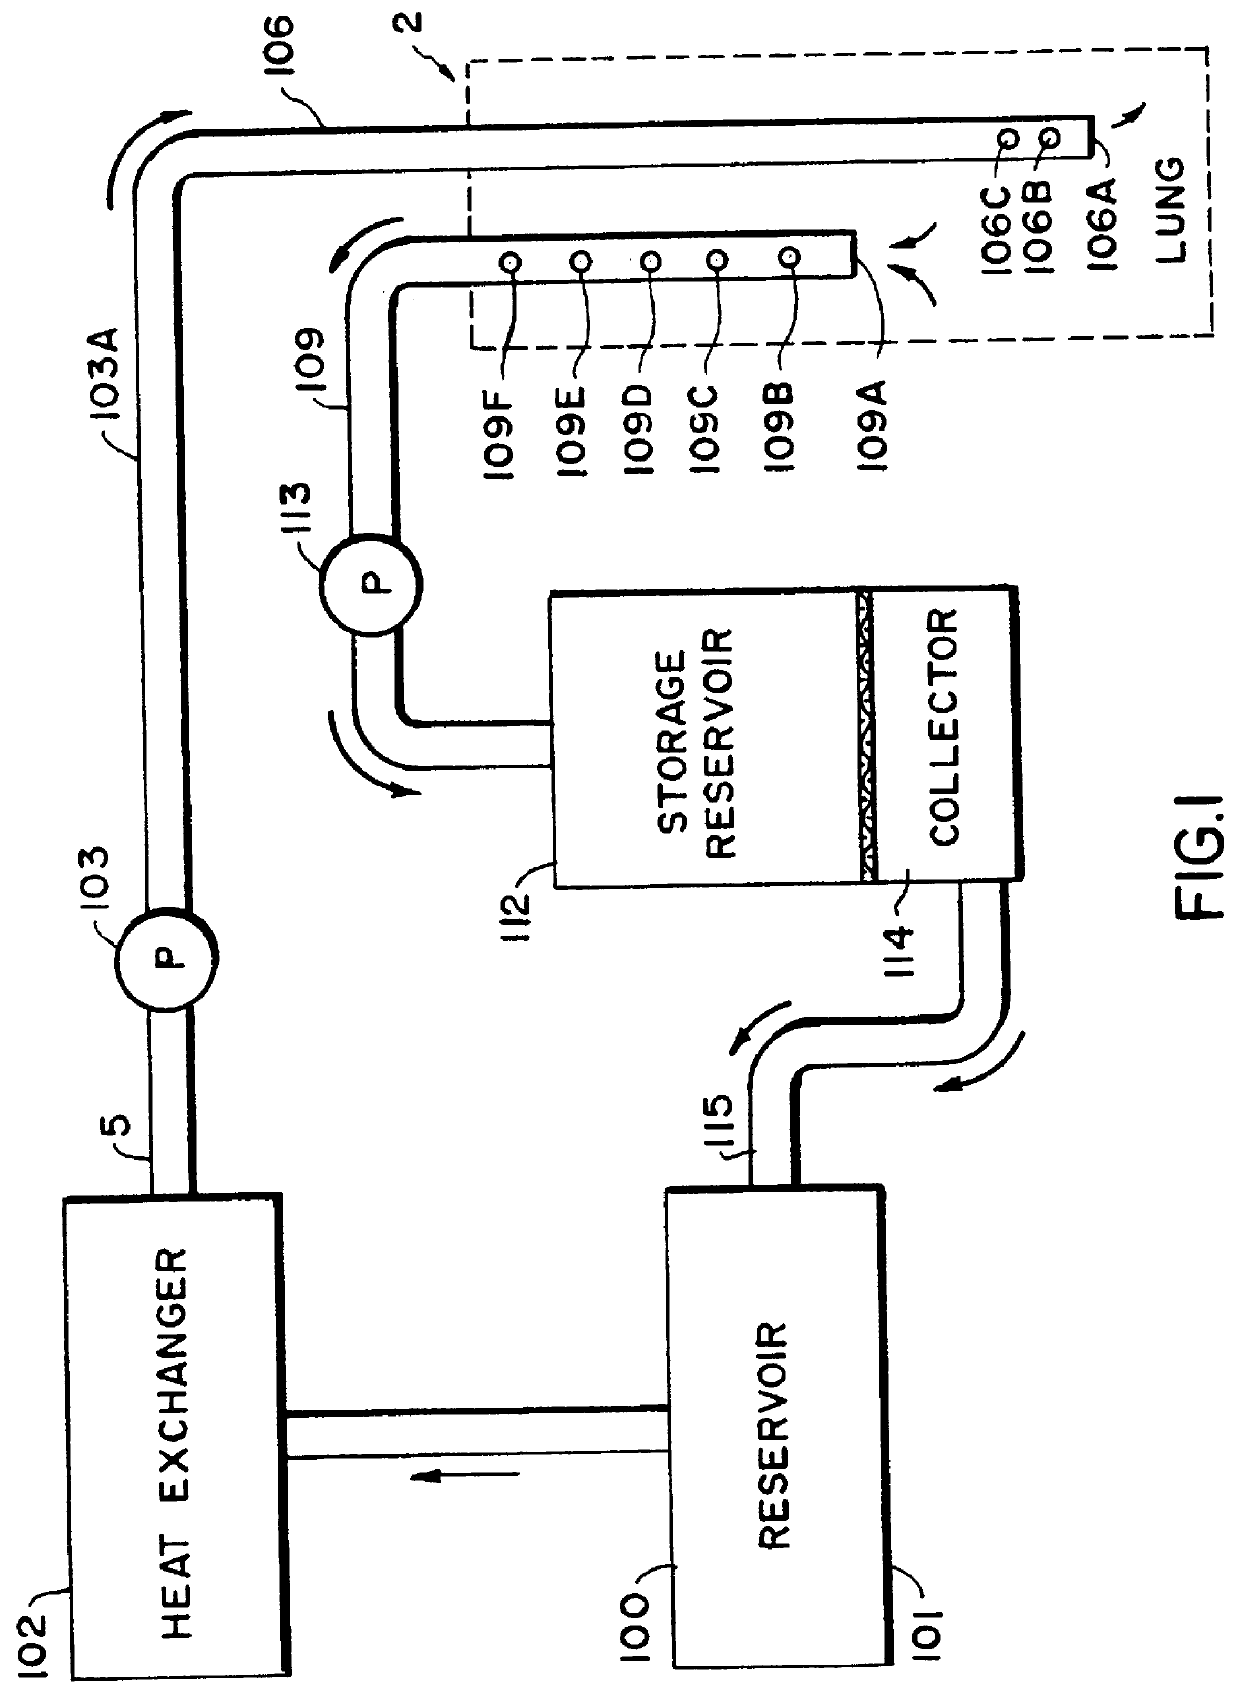 Apparatus and method for the rapid induction of hypothermic brain preservation